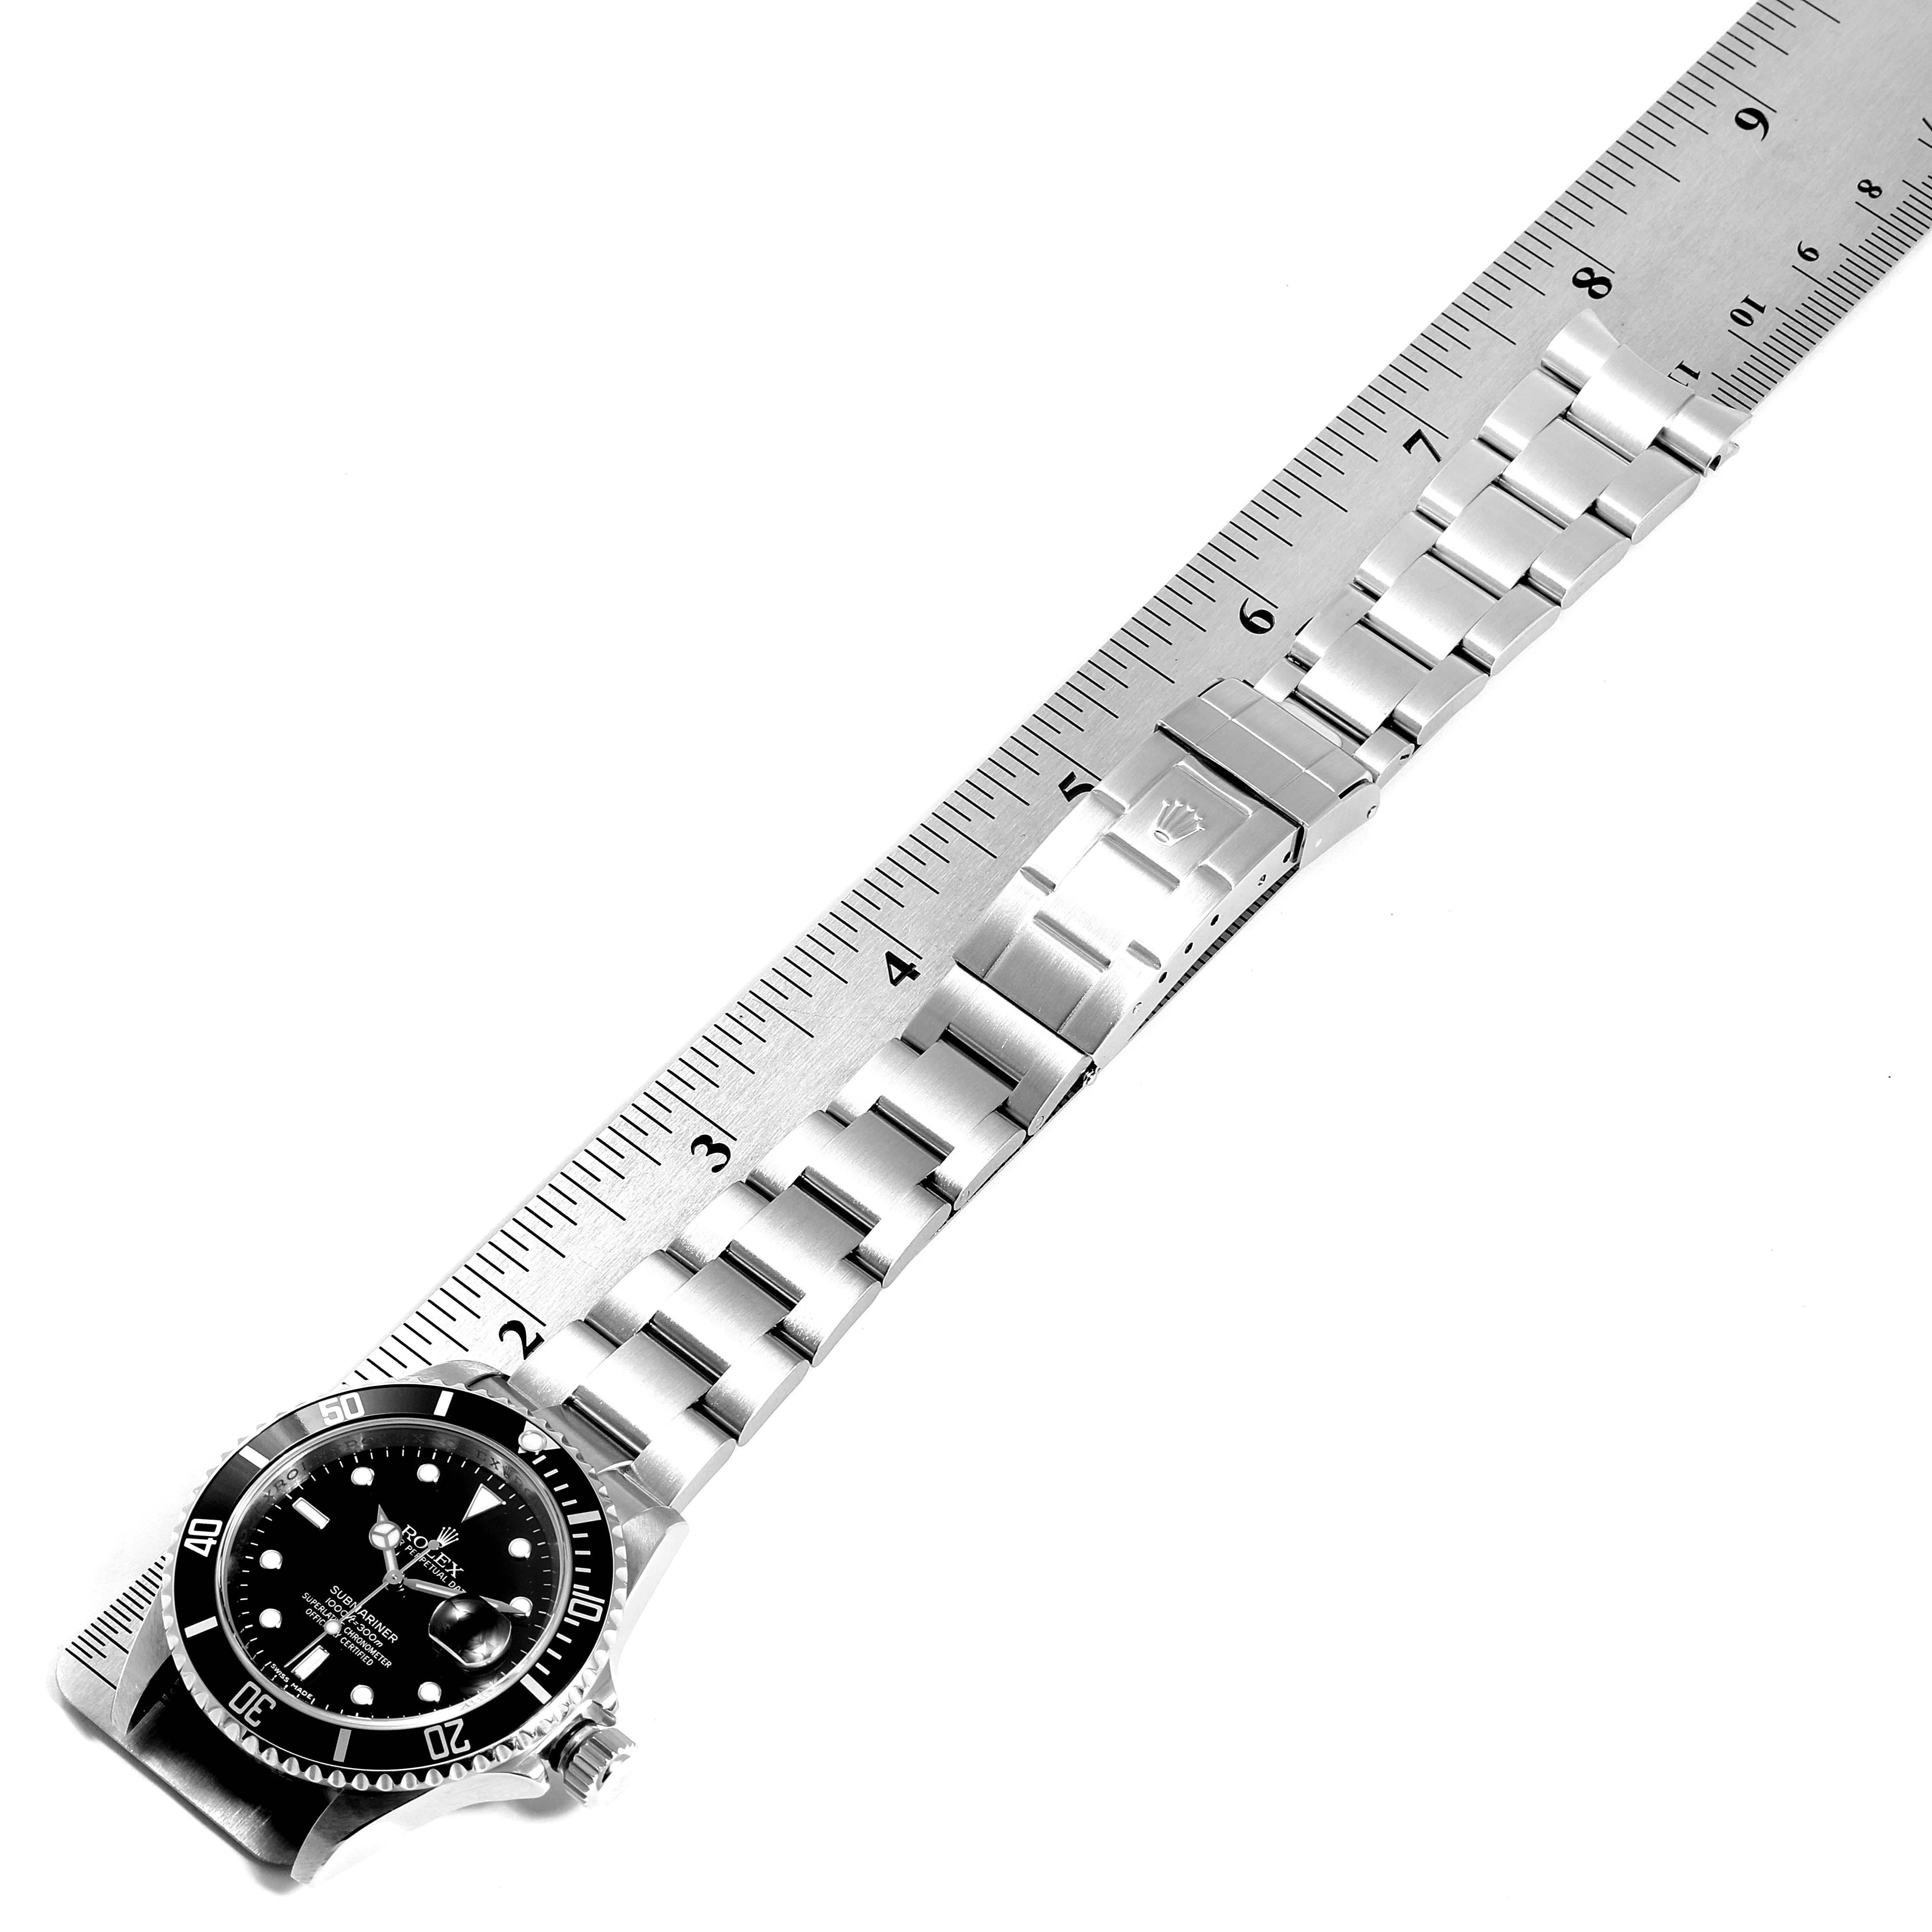 Rolex Submariner Date Stainless Steel Men's Watch 16610 Box Card For Sale 7